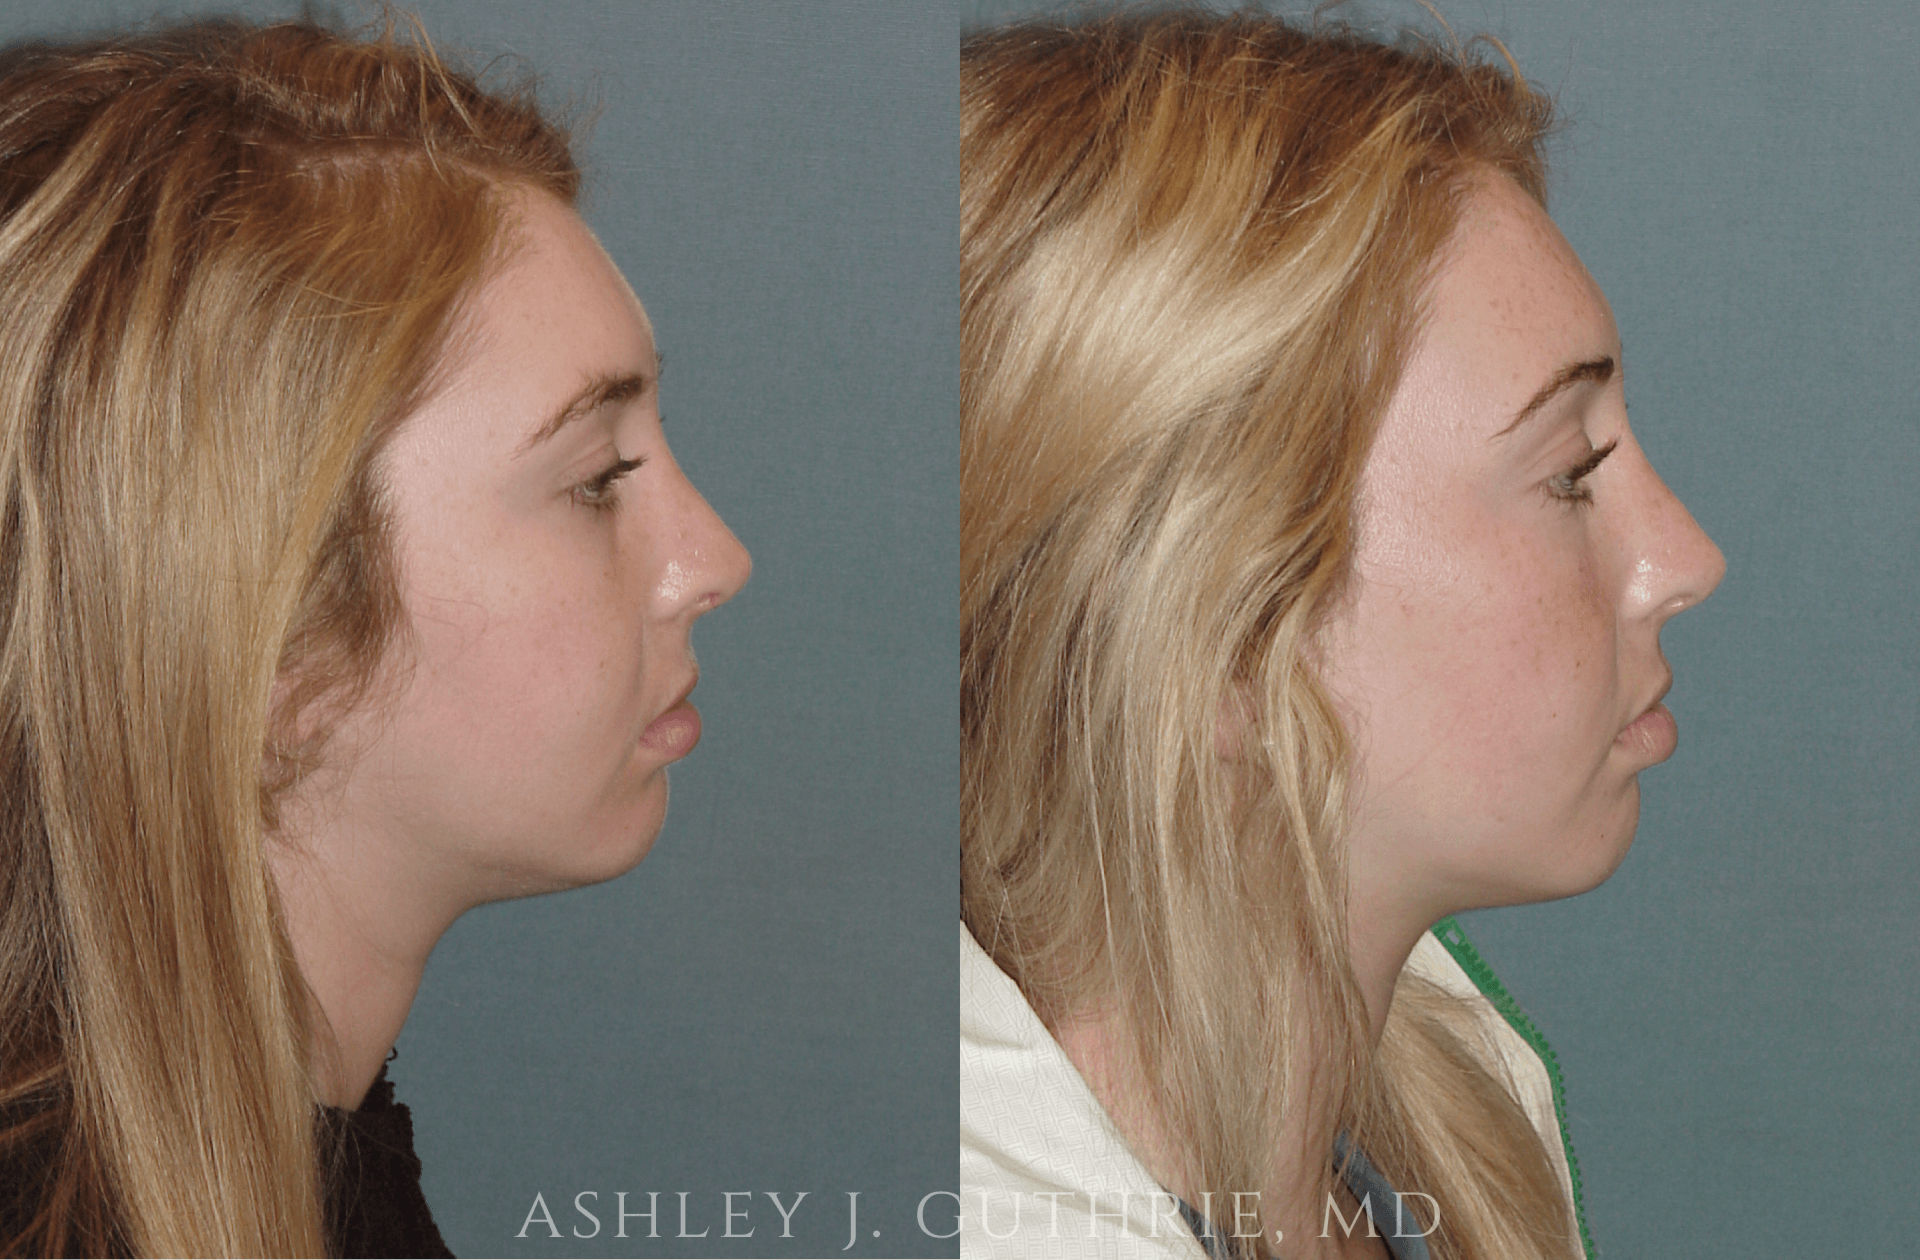 female patient before and after Chin Implant procedure by Dr. Guthrie